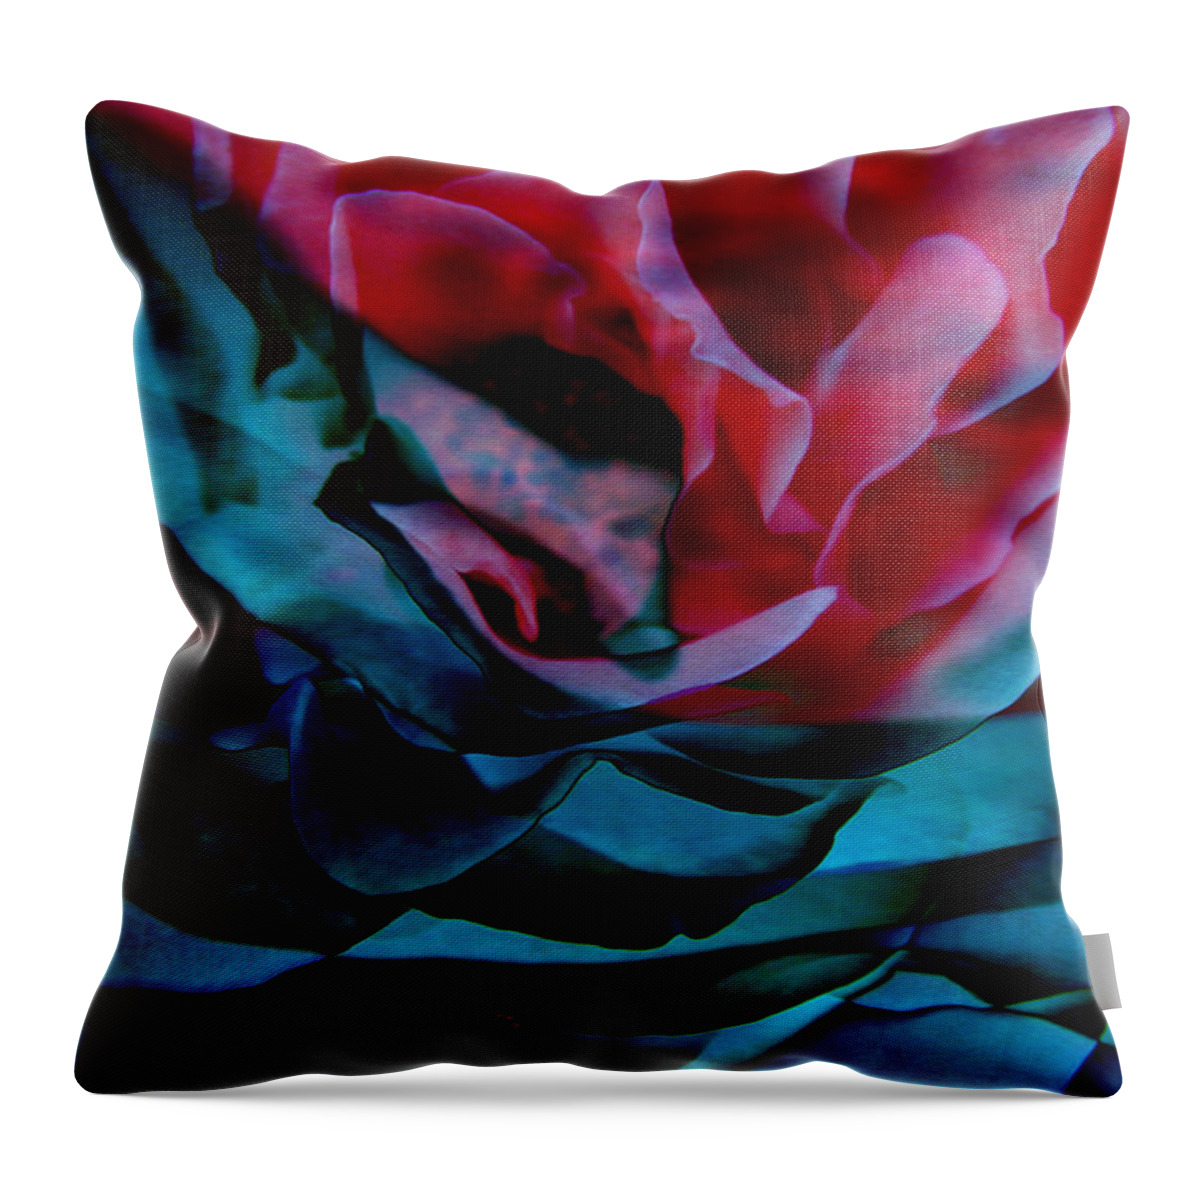 Abstract Art Throw Pillow featuring the painting Romance - Abstract Art by Jaison Cianelli